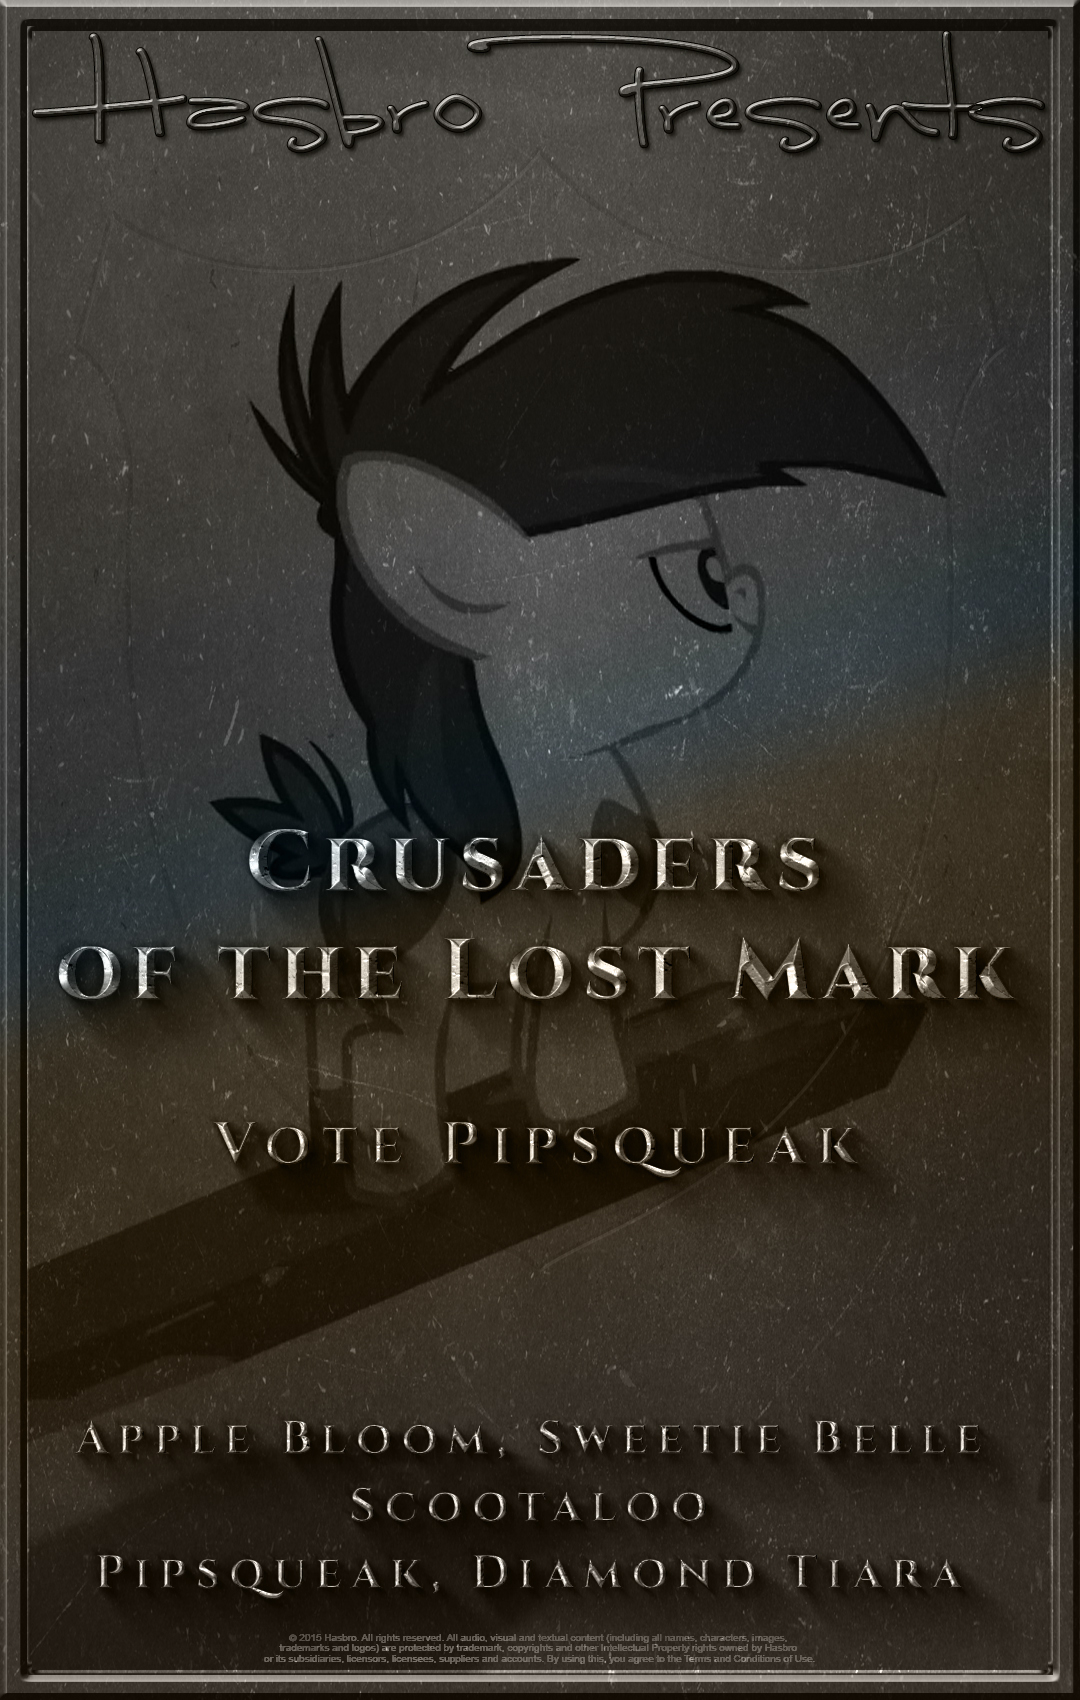 mlp___crusaders_of_the_lost_mark___movie_poster_by_pims1978-d9crali.jpg